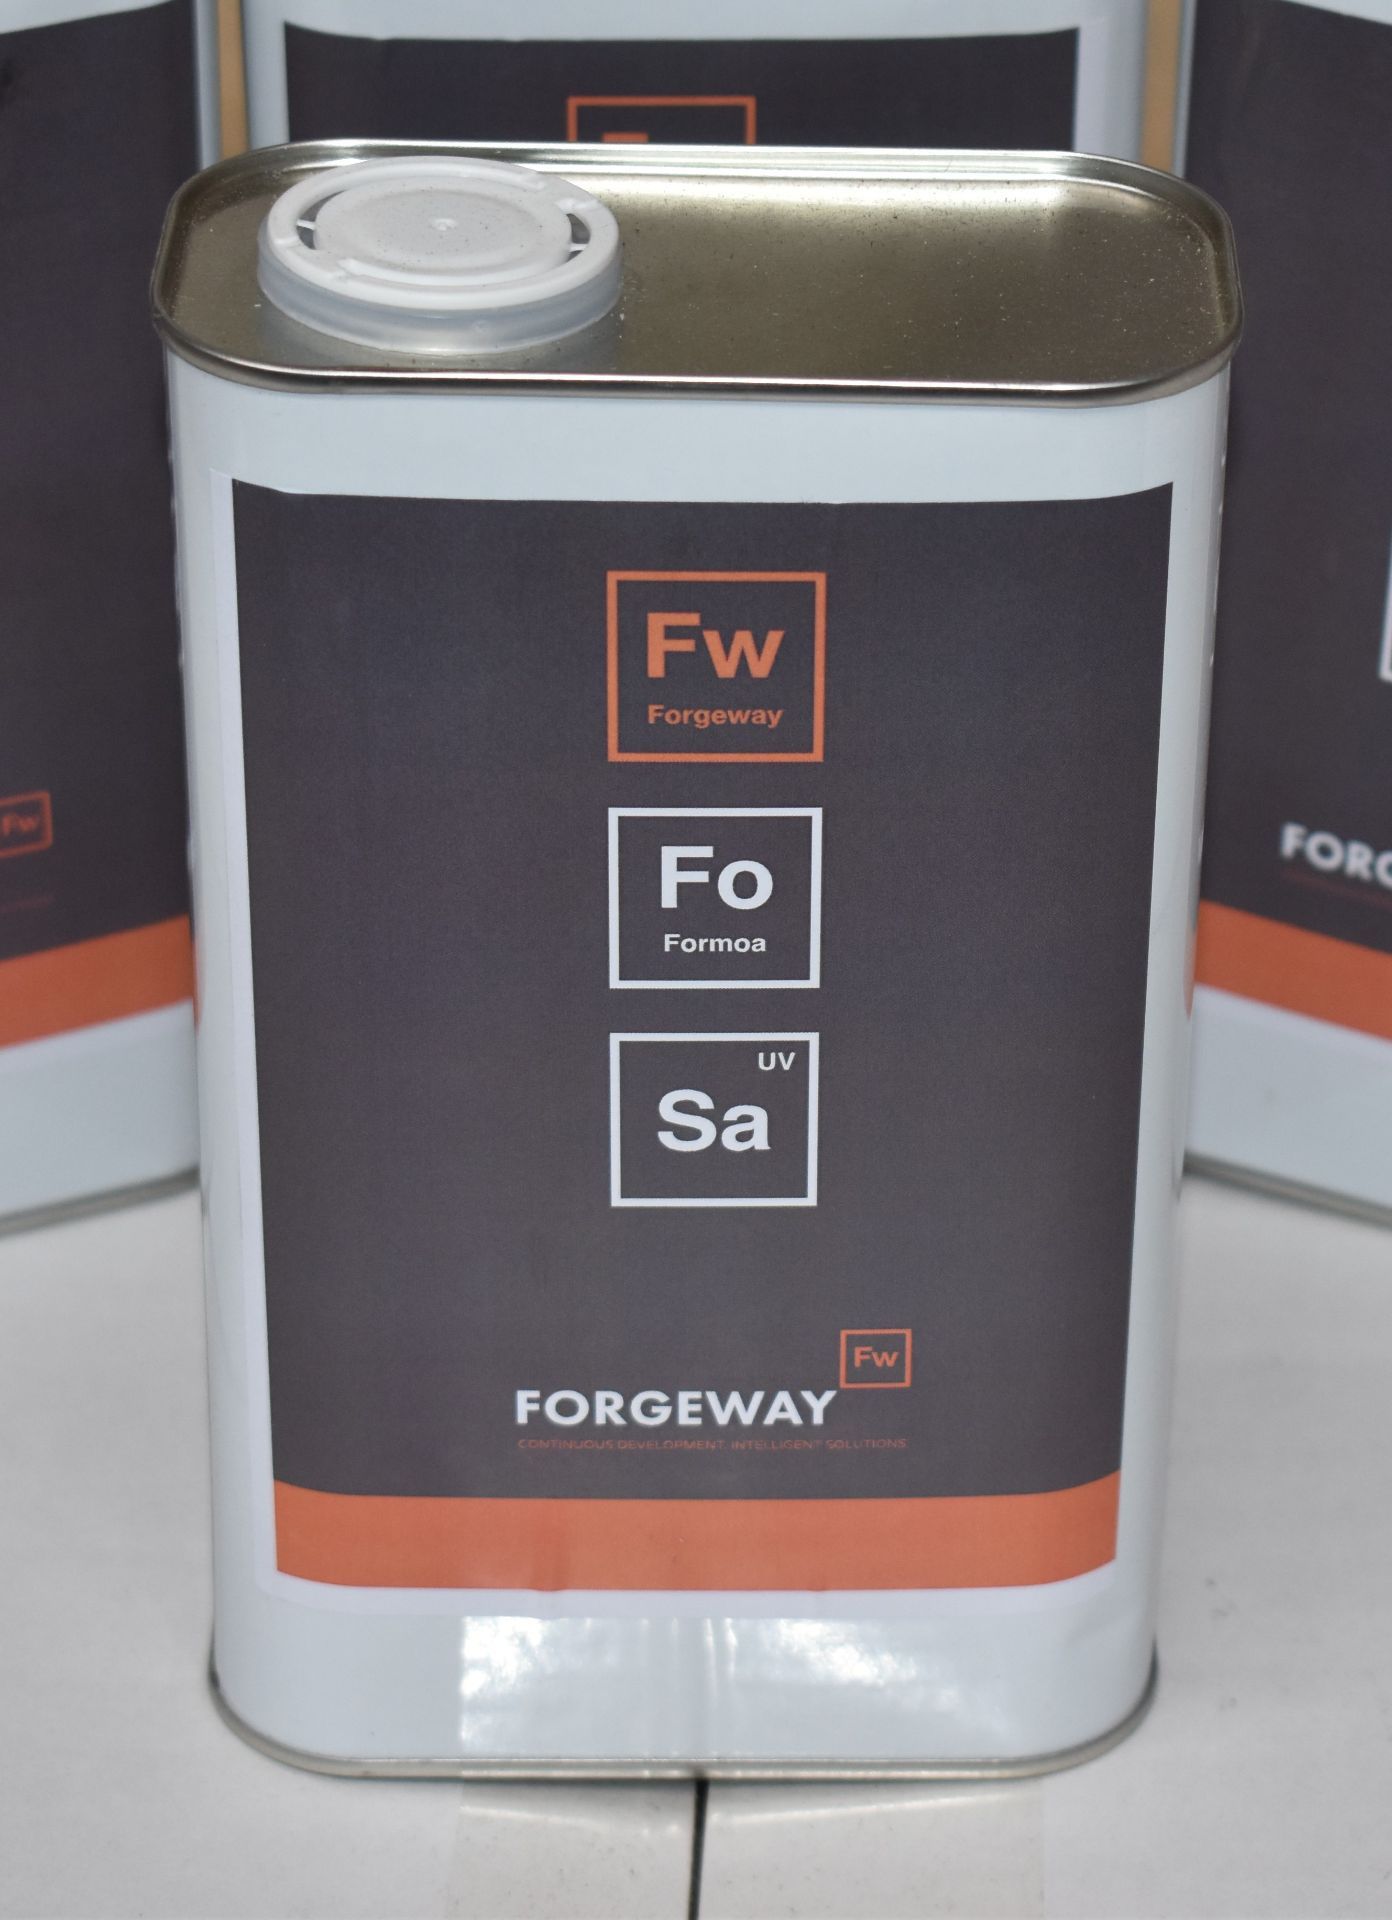 12 x Forgeway Formoa Surface Activator 1 Litre Containers - Adhesion Promotor, Cleaner, Degreaser